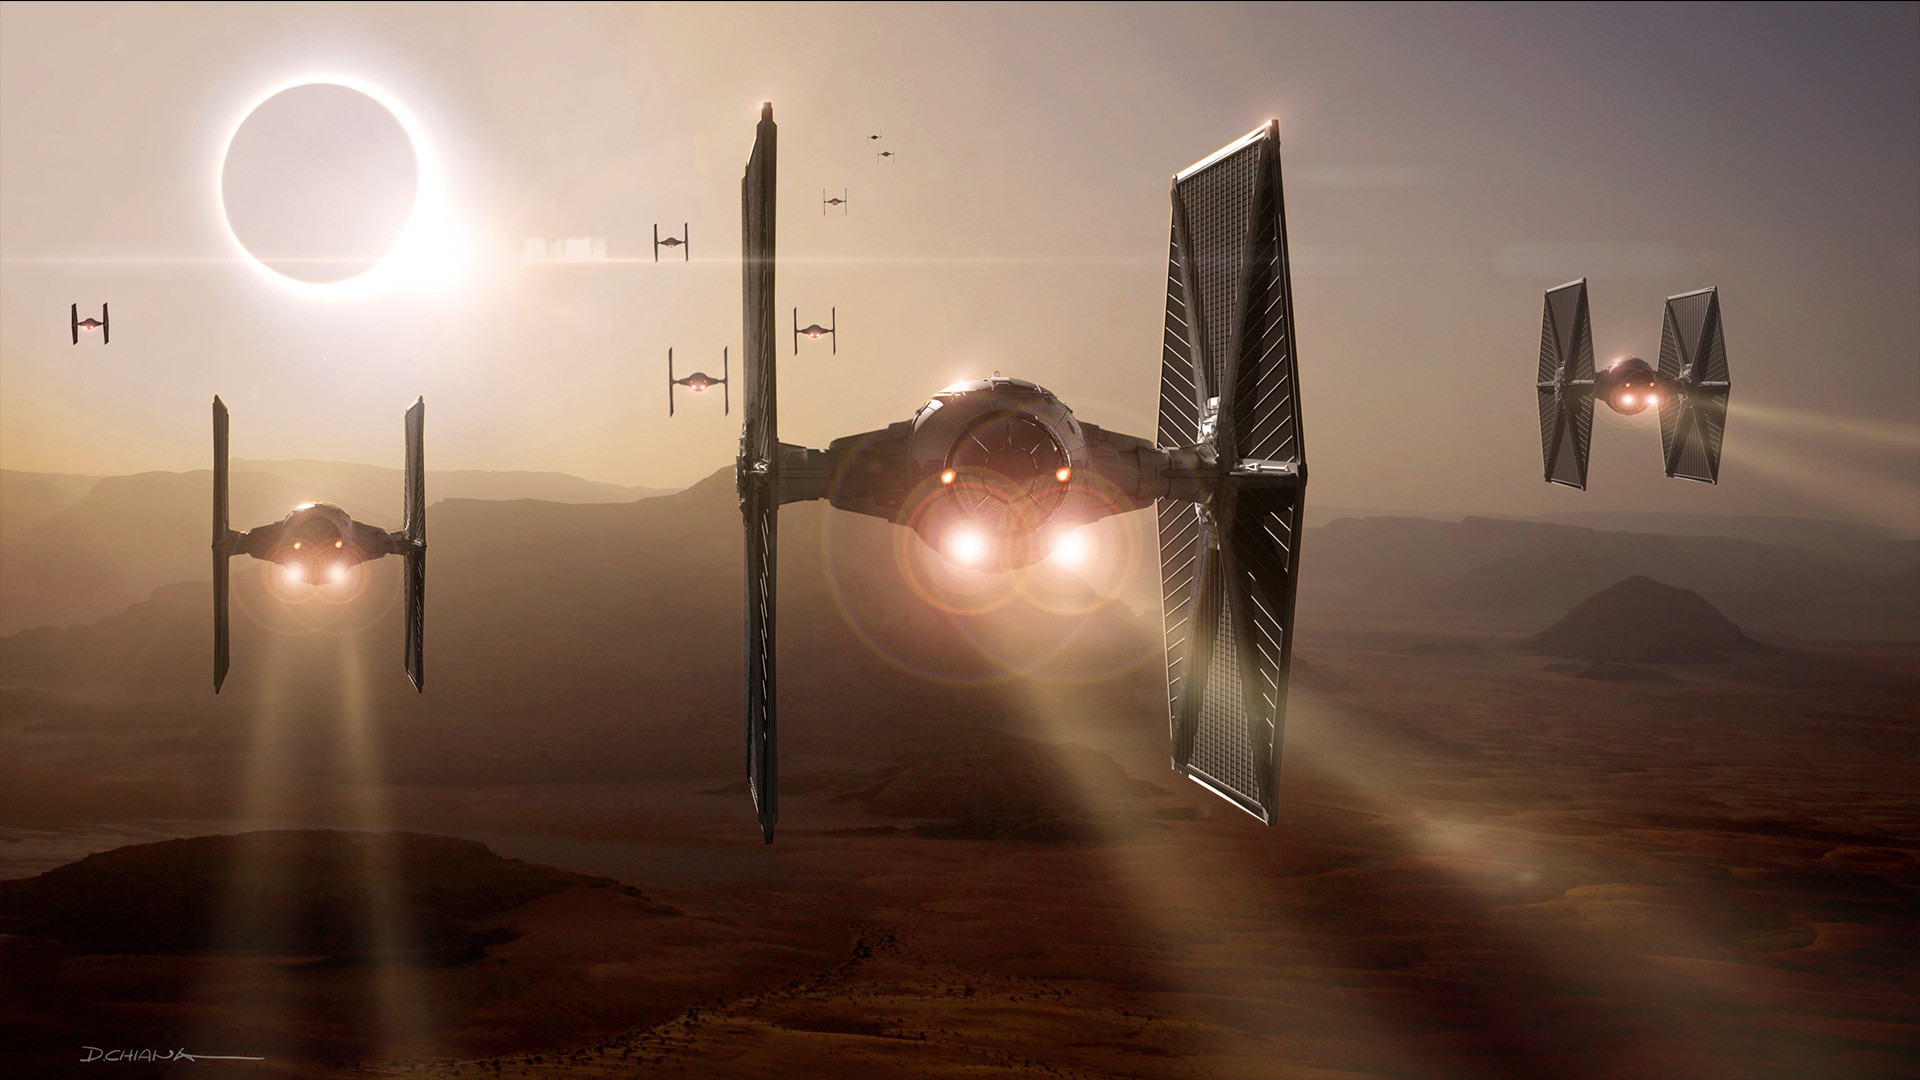 Star Wars The Force Awakens Concept Art Image